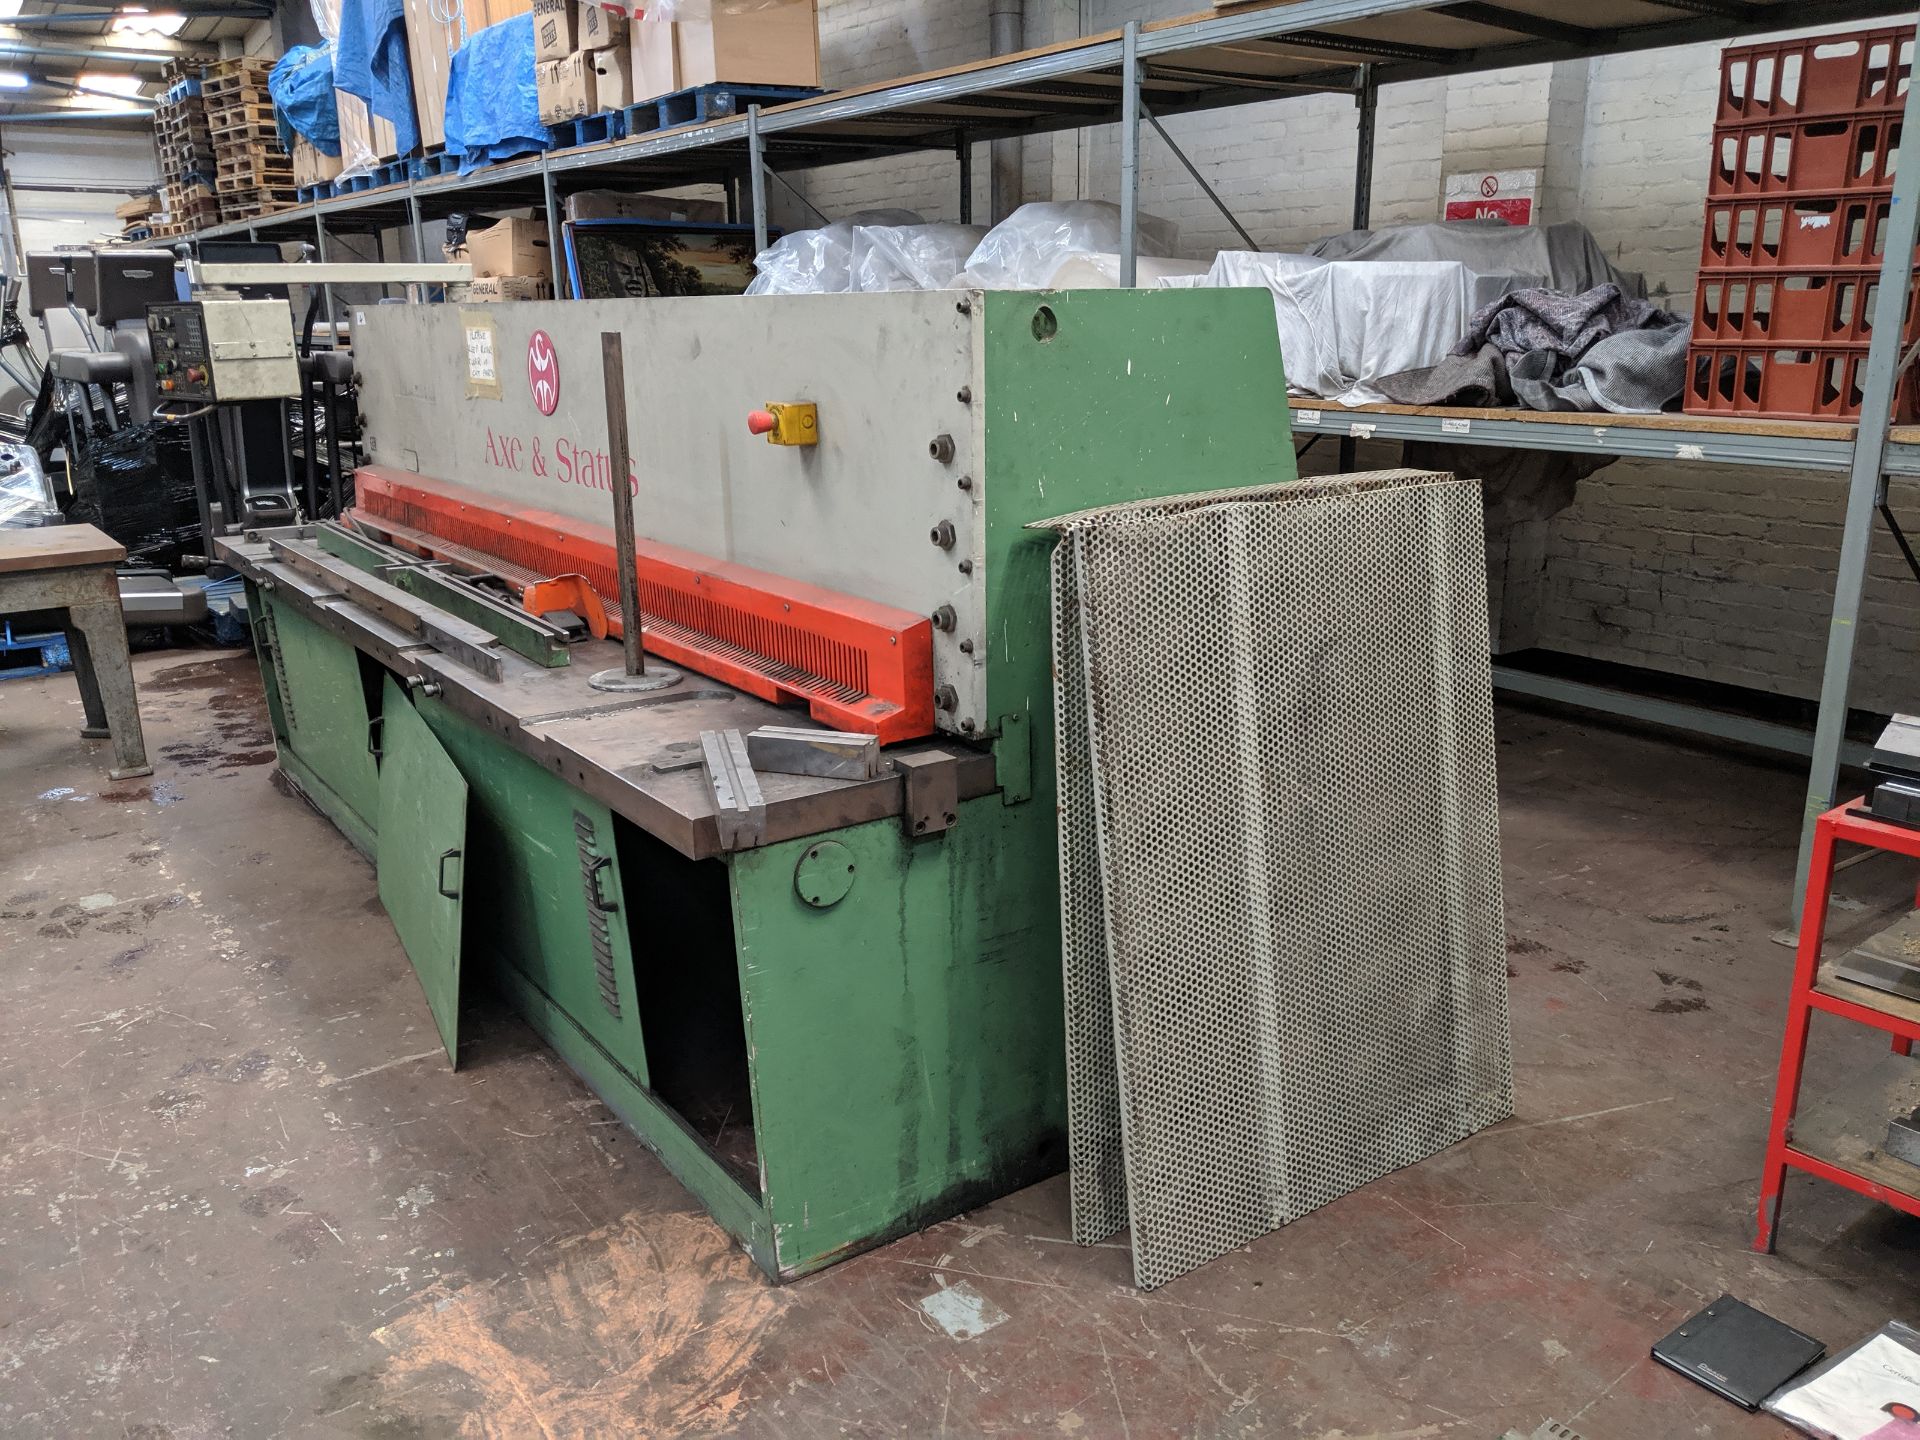 1997 Axe & Status hydraulic guillotine shear by Guifil, reference GHE-630, serial no. 024539  We - Image 8 of 9